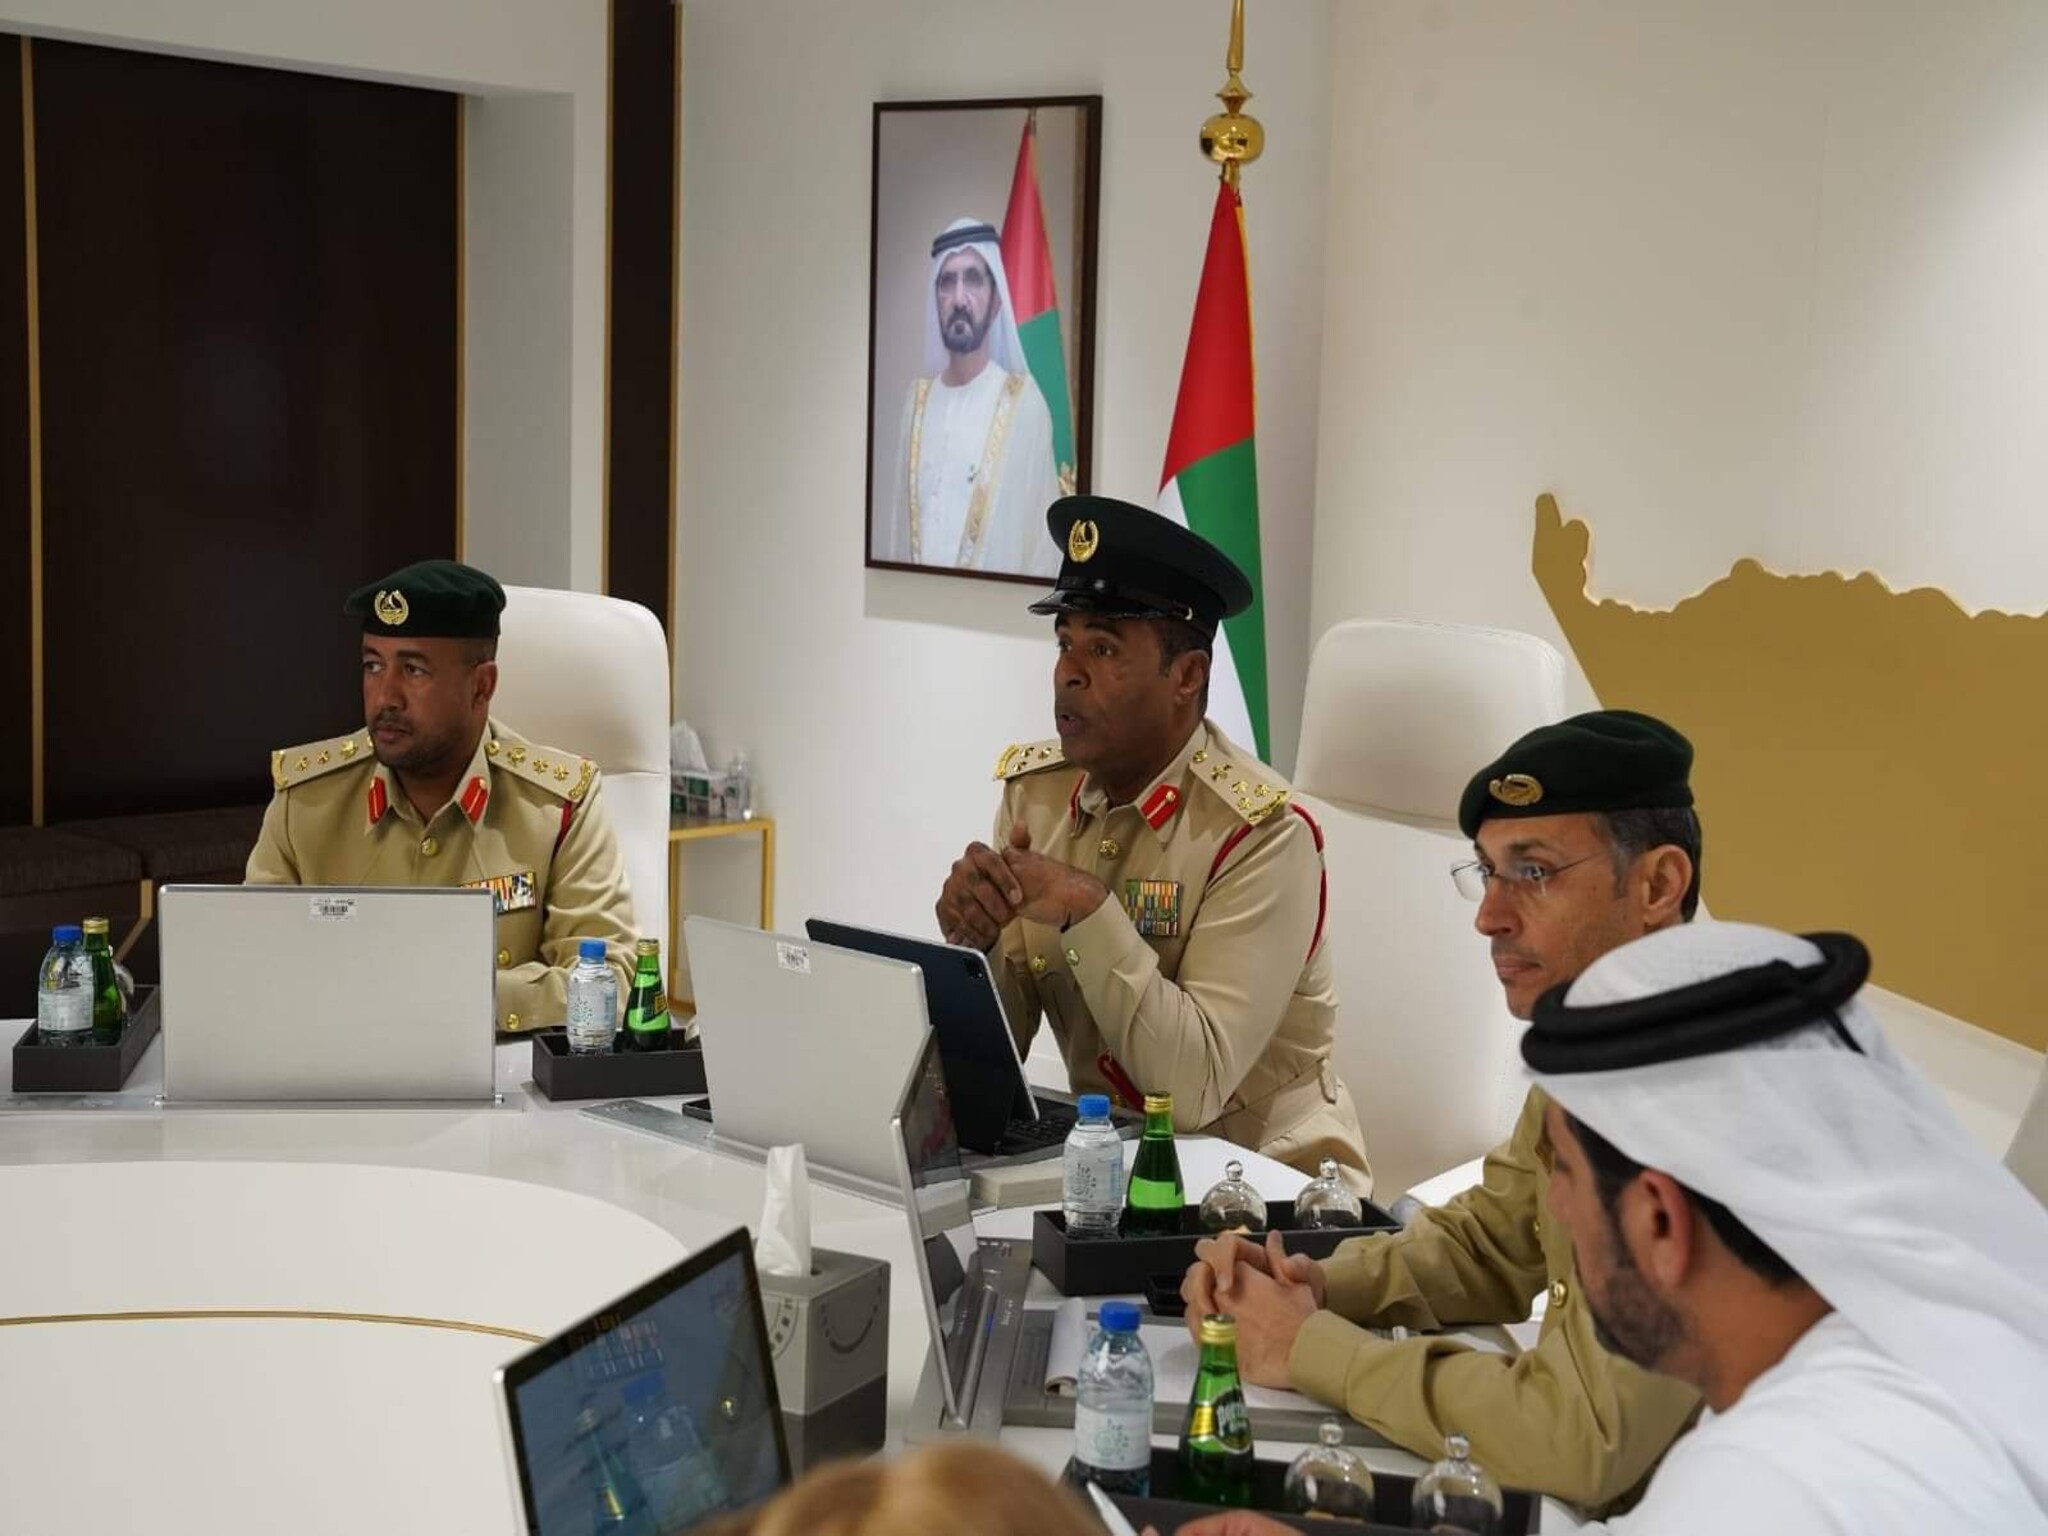 Important announcement from Dubai Police to visitors to the Emirate of Dubai